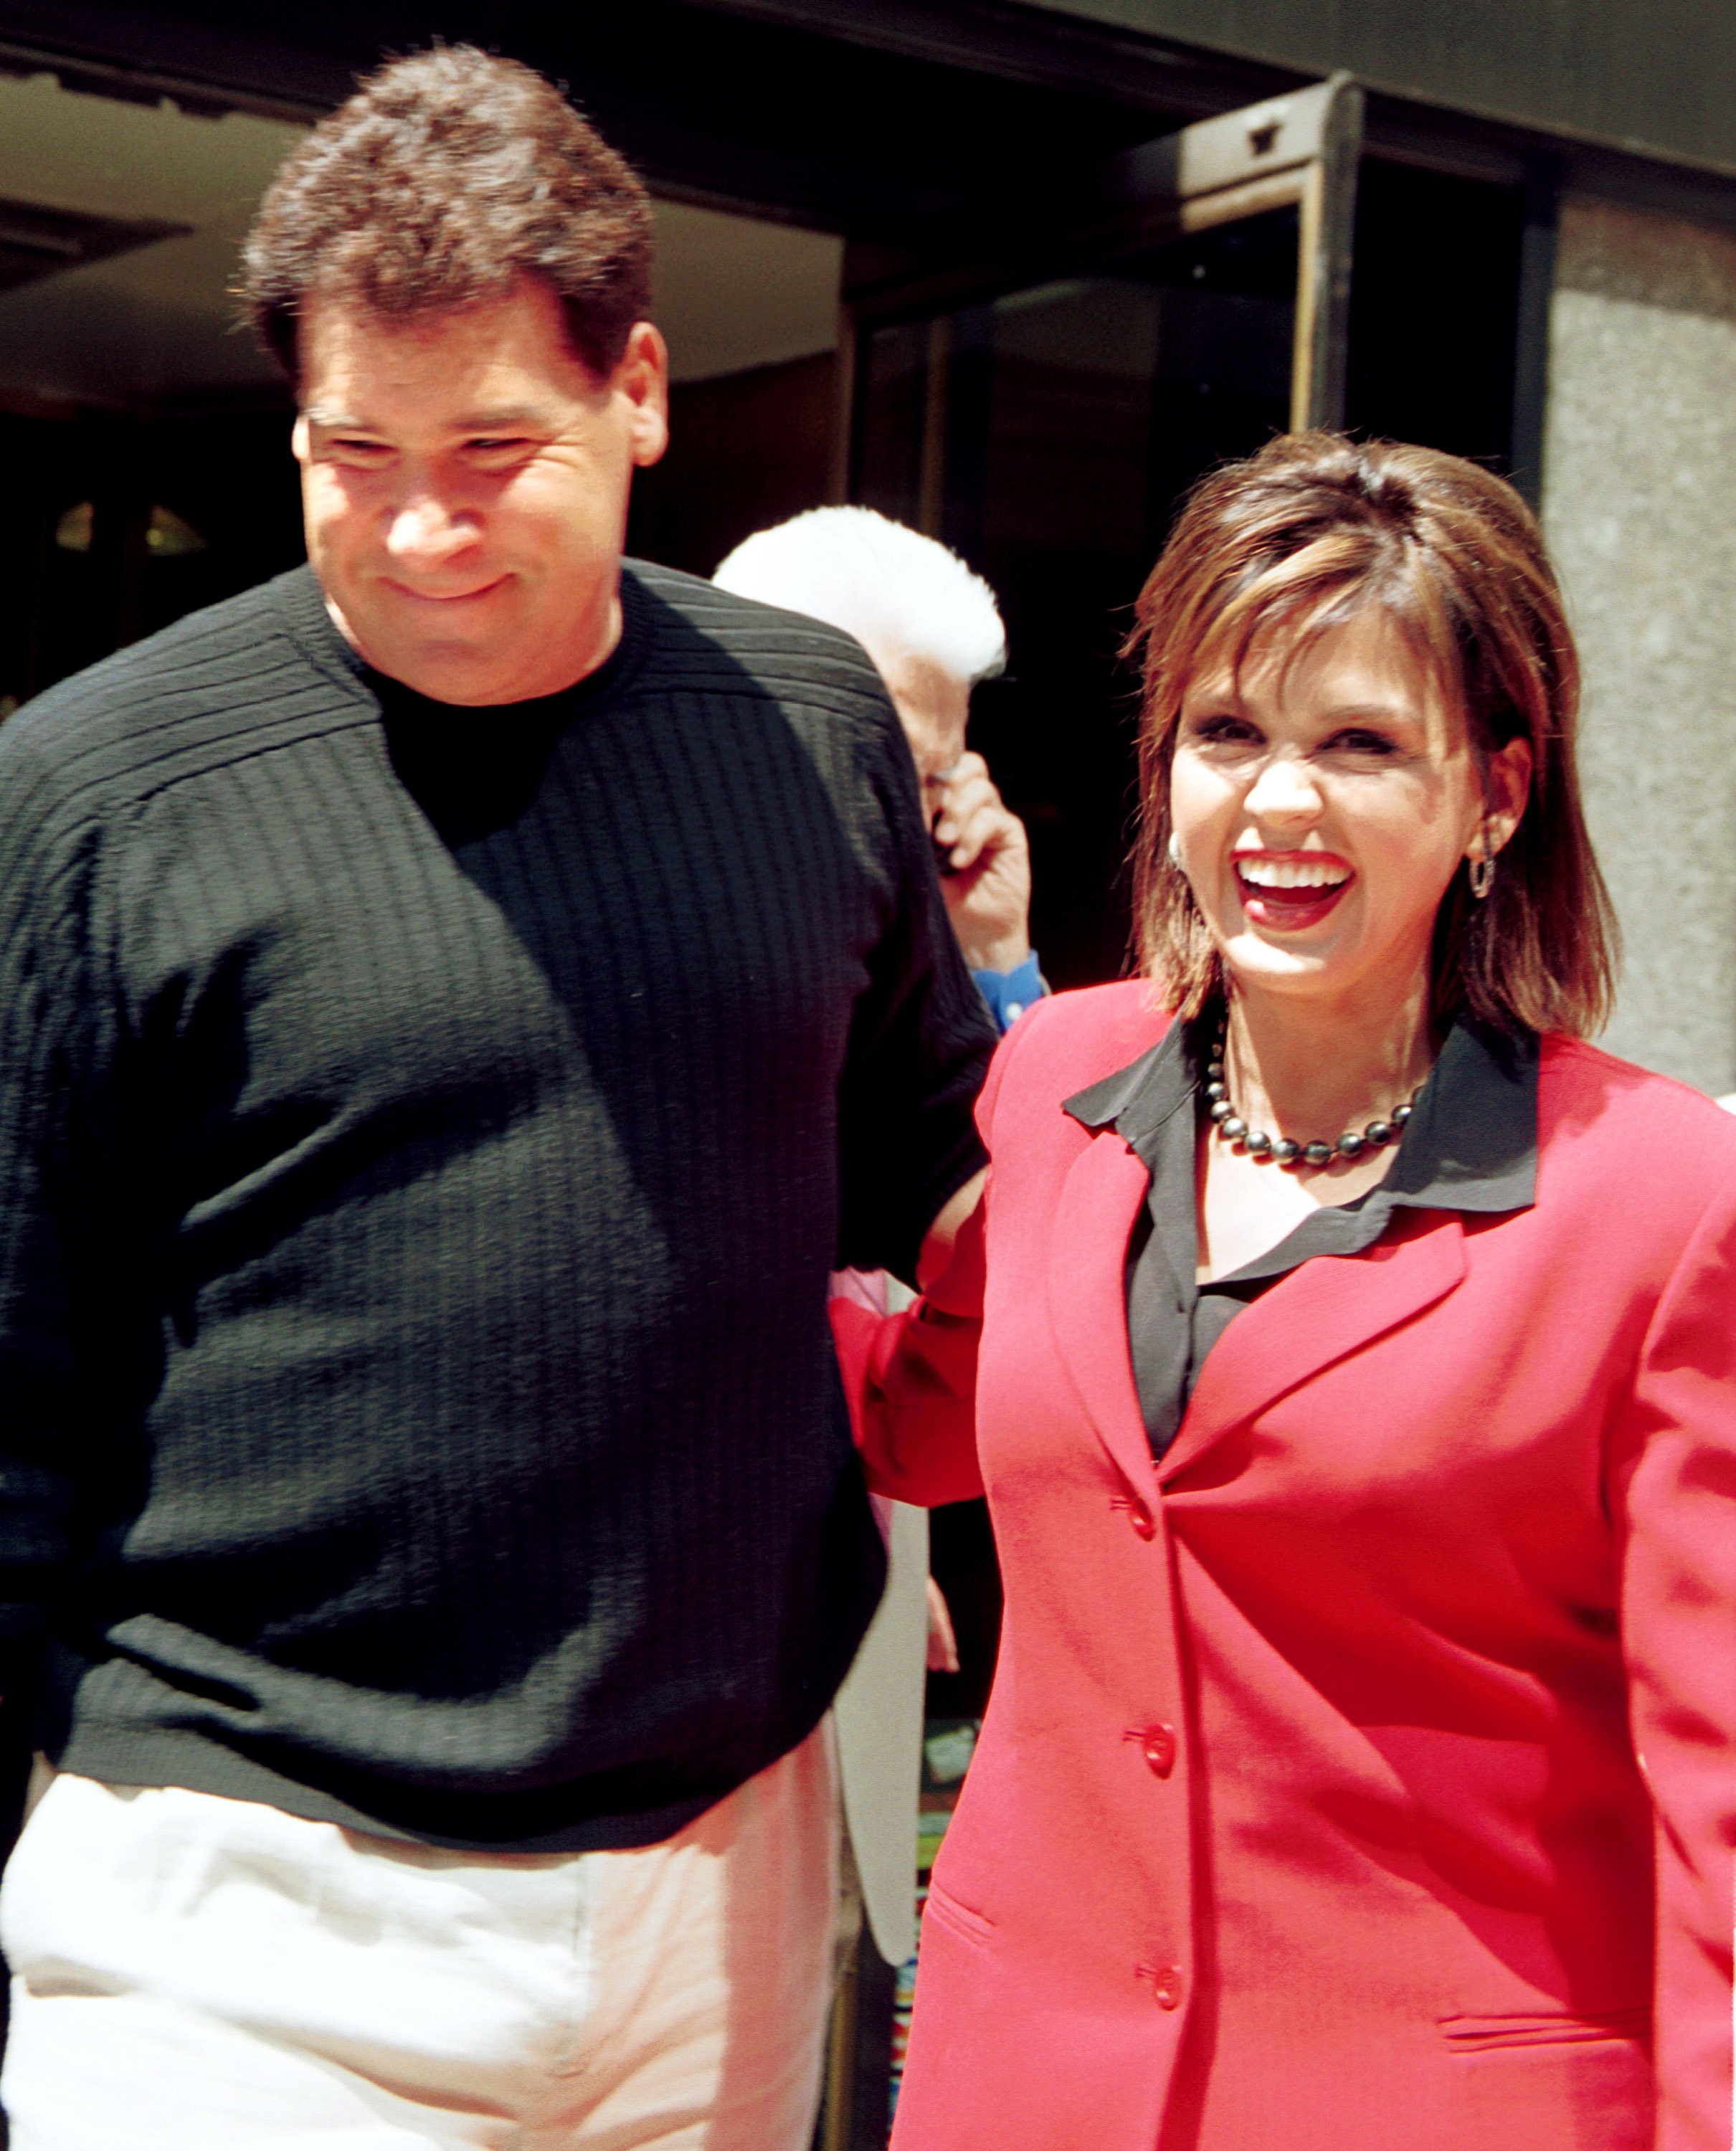 Marie Osmond and Brian Blosil leave a book signing for her new book "Behind the Smile" May 1, 2001 in New York City | Source: Getty Images